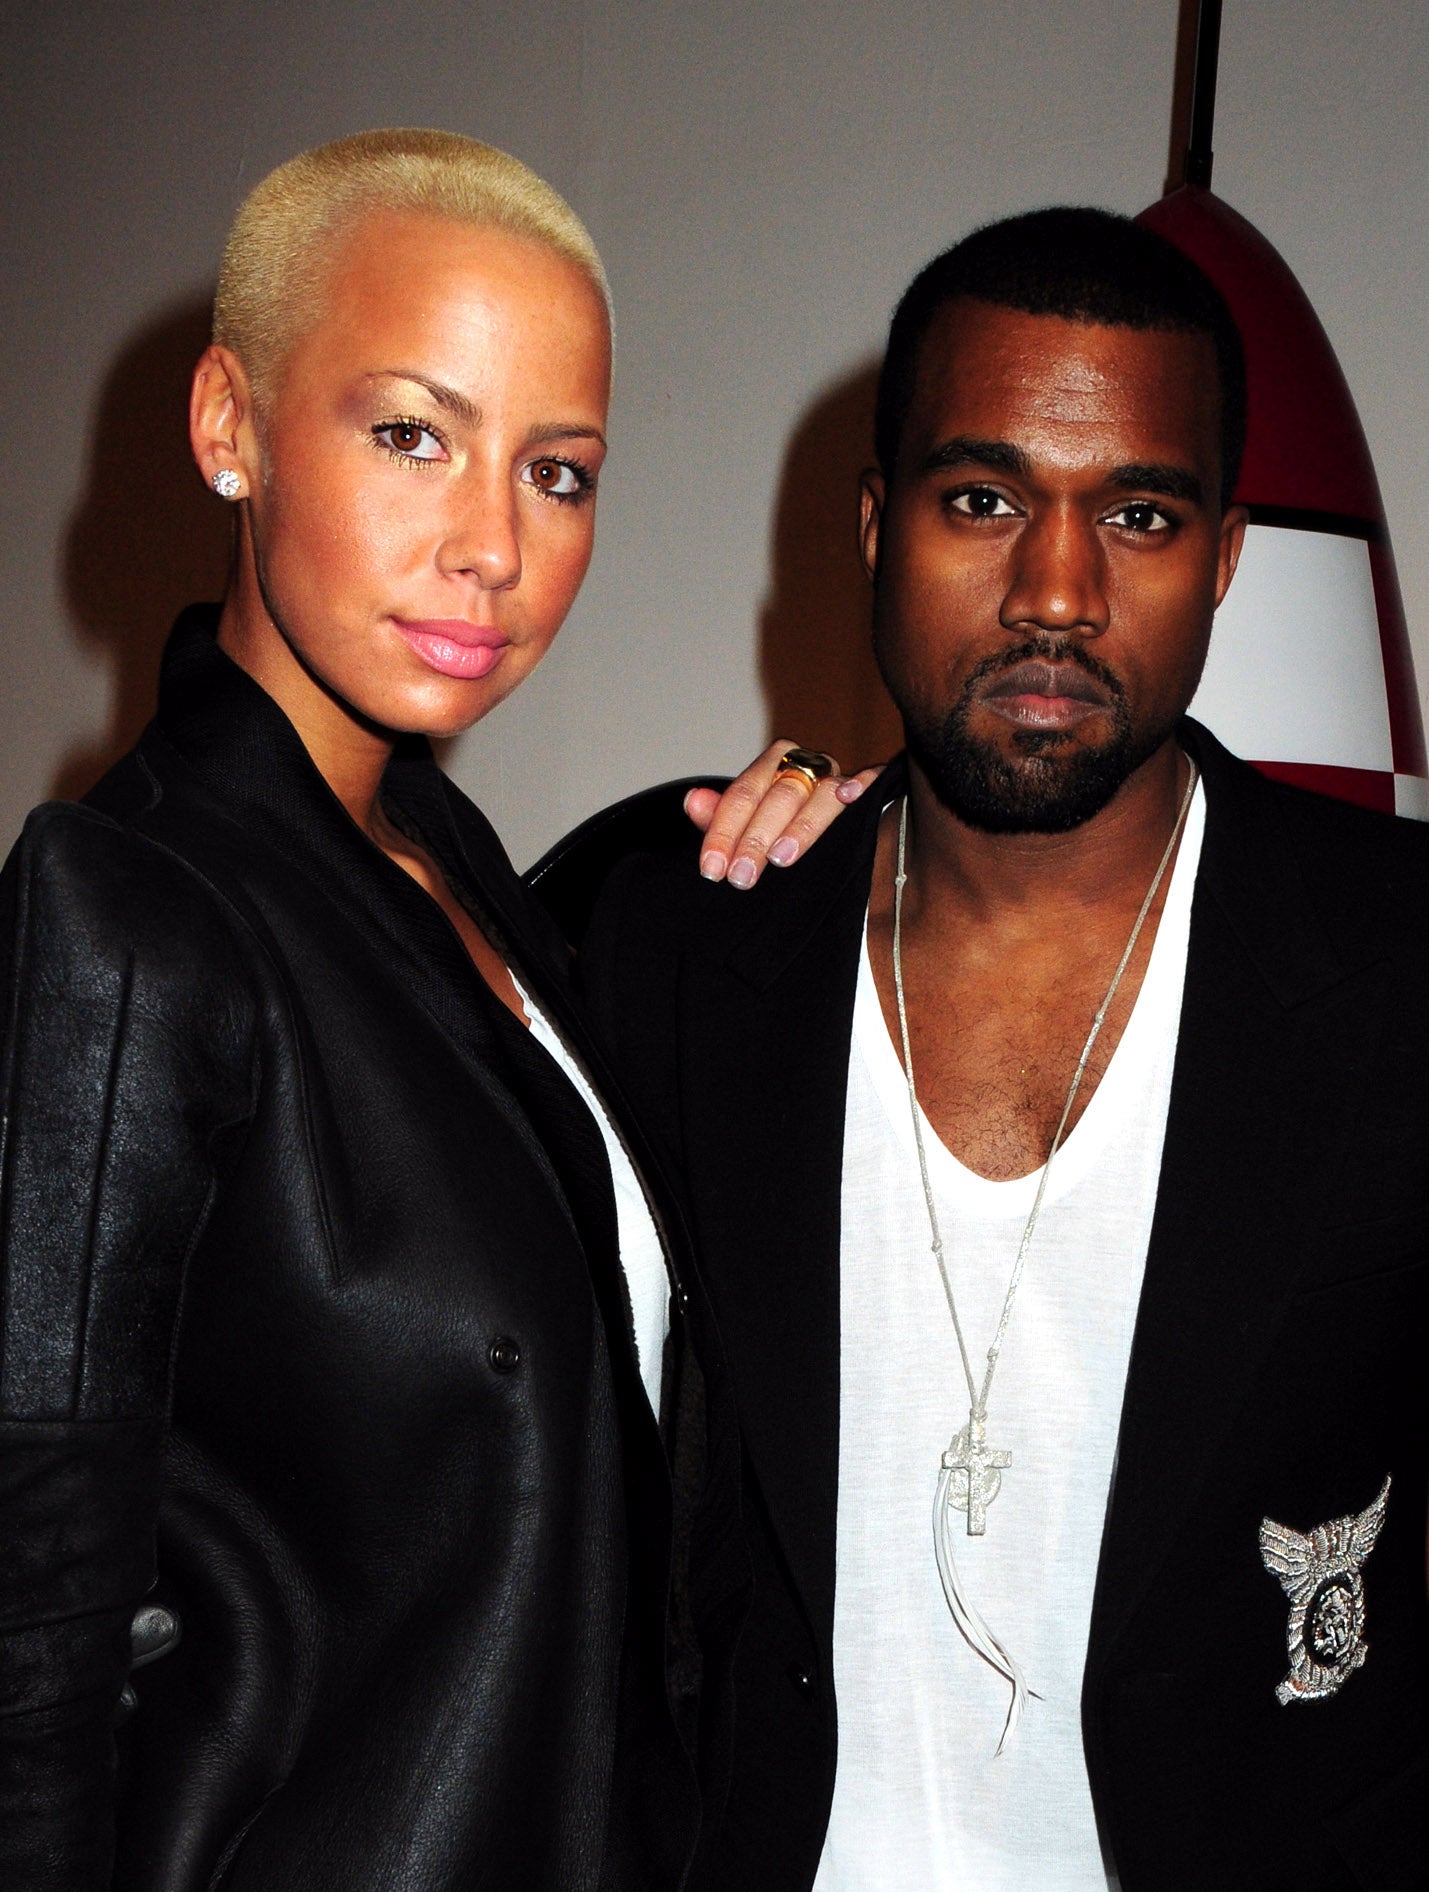 Amber Rose Reveals Dark Days After Kanye West Split: ‘If I Was Going To Kill Myself, I Would Have During Those Times’